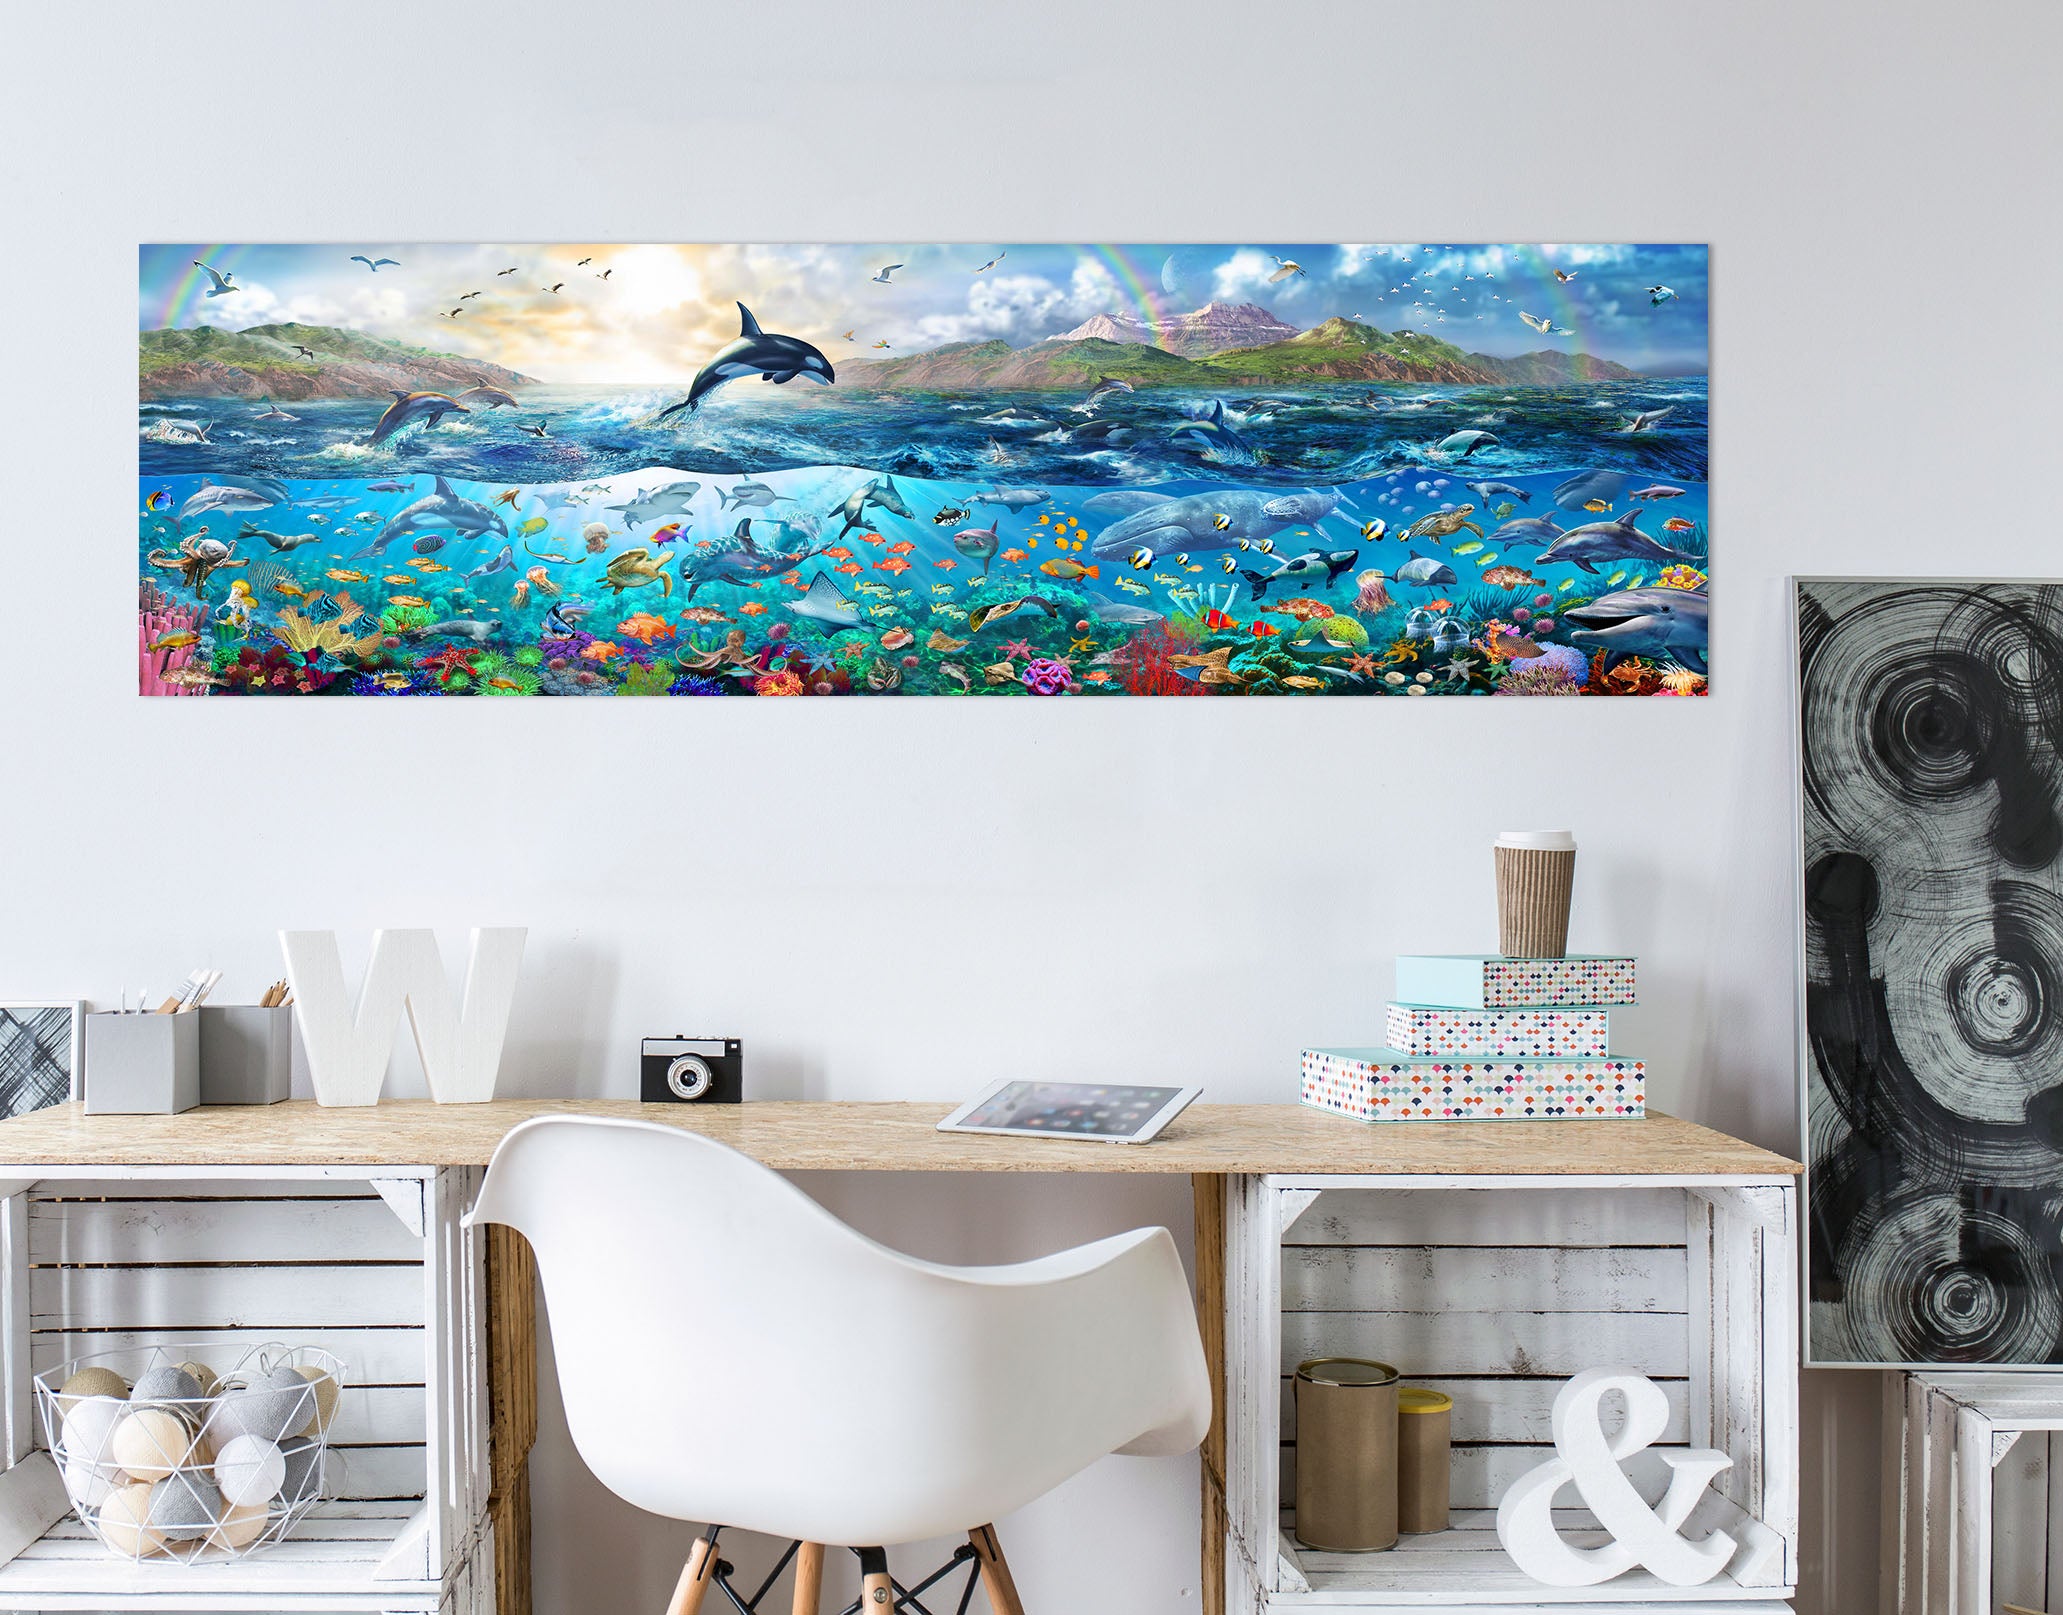 3D Dolphin Jumping 011 Adrian Chesterman Wall Sticker